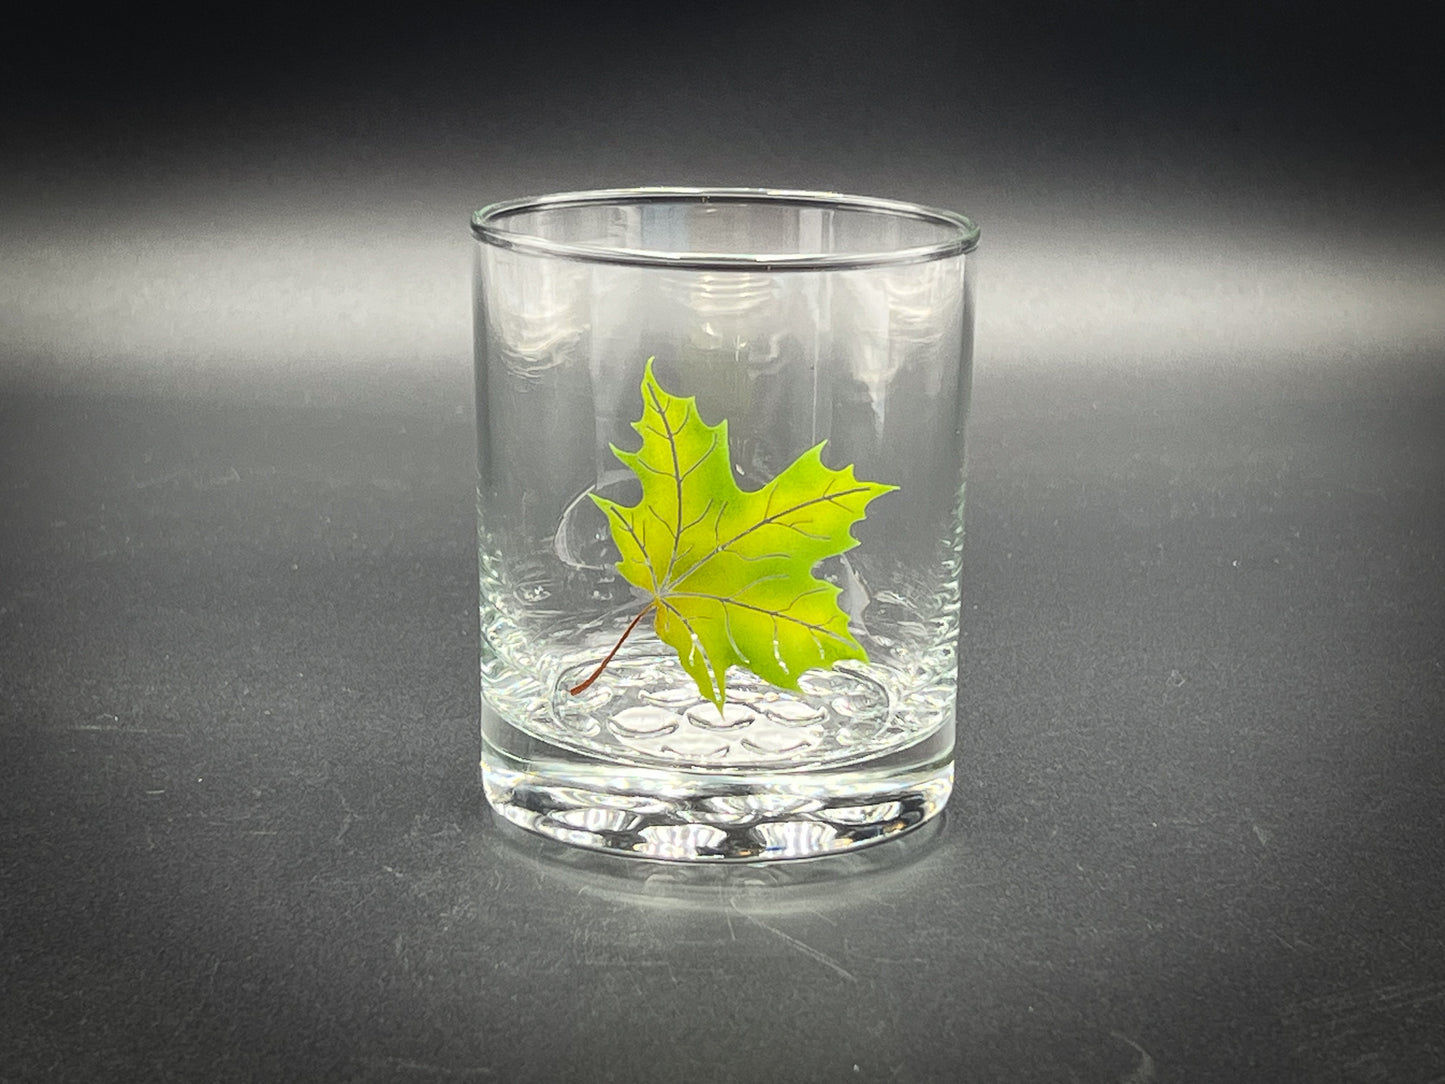 Summer maple leaf Engraved and Painted - 12.25 oz Double Rocks Glass